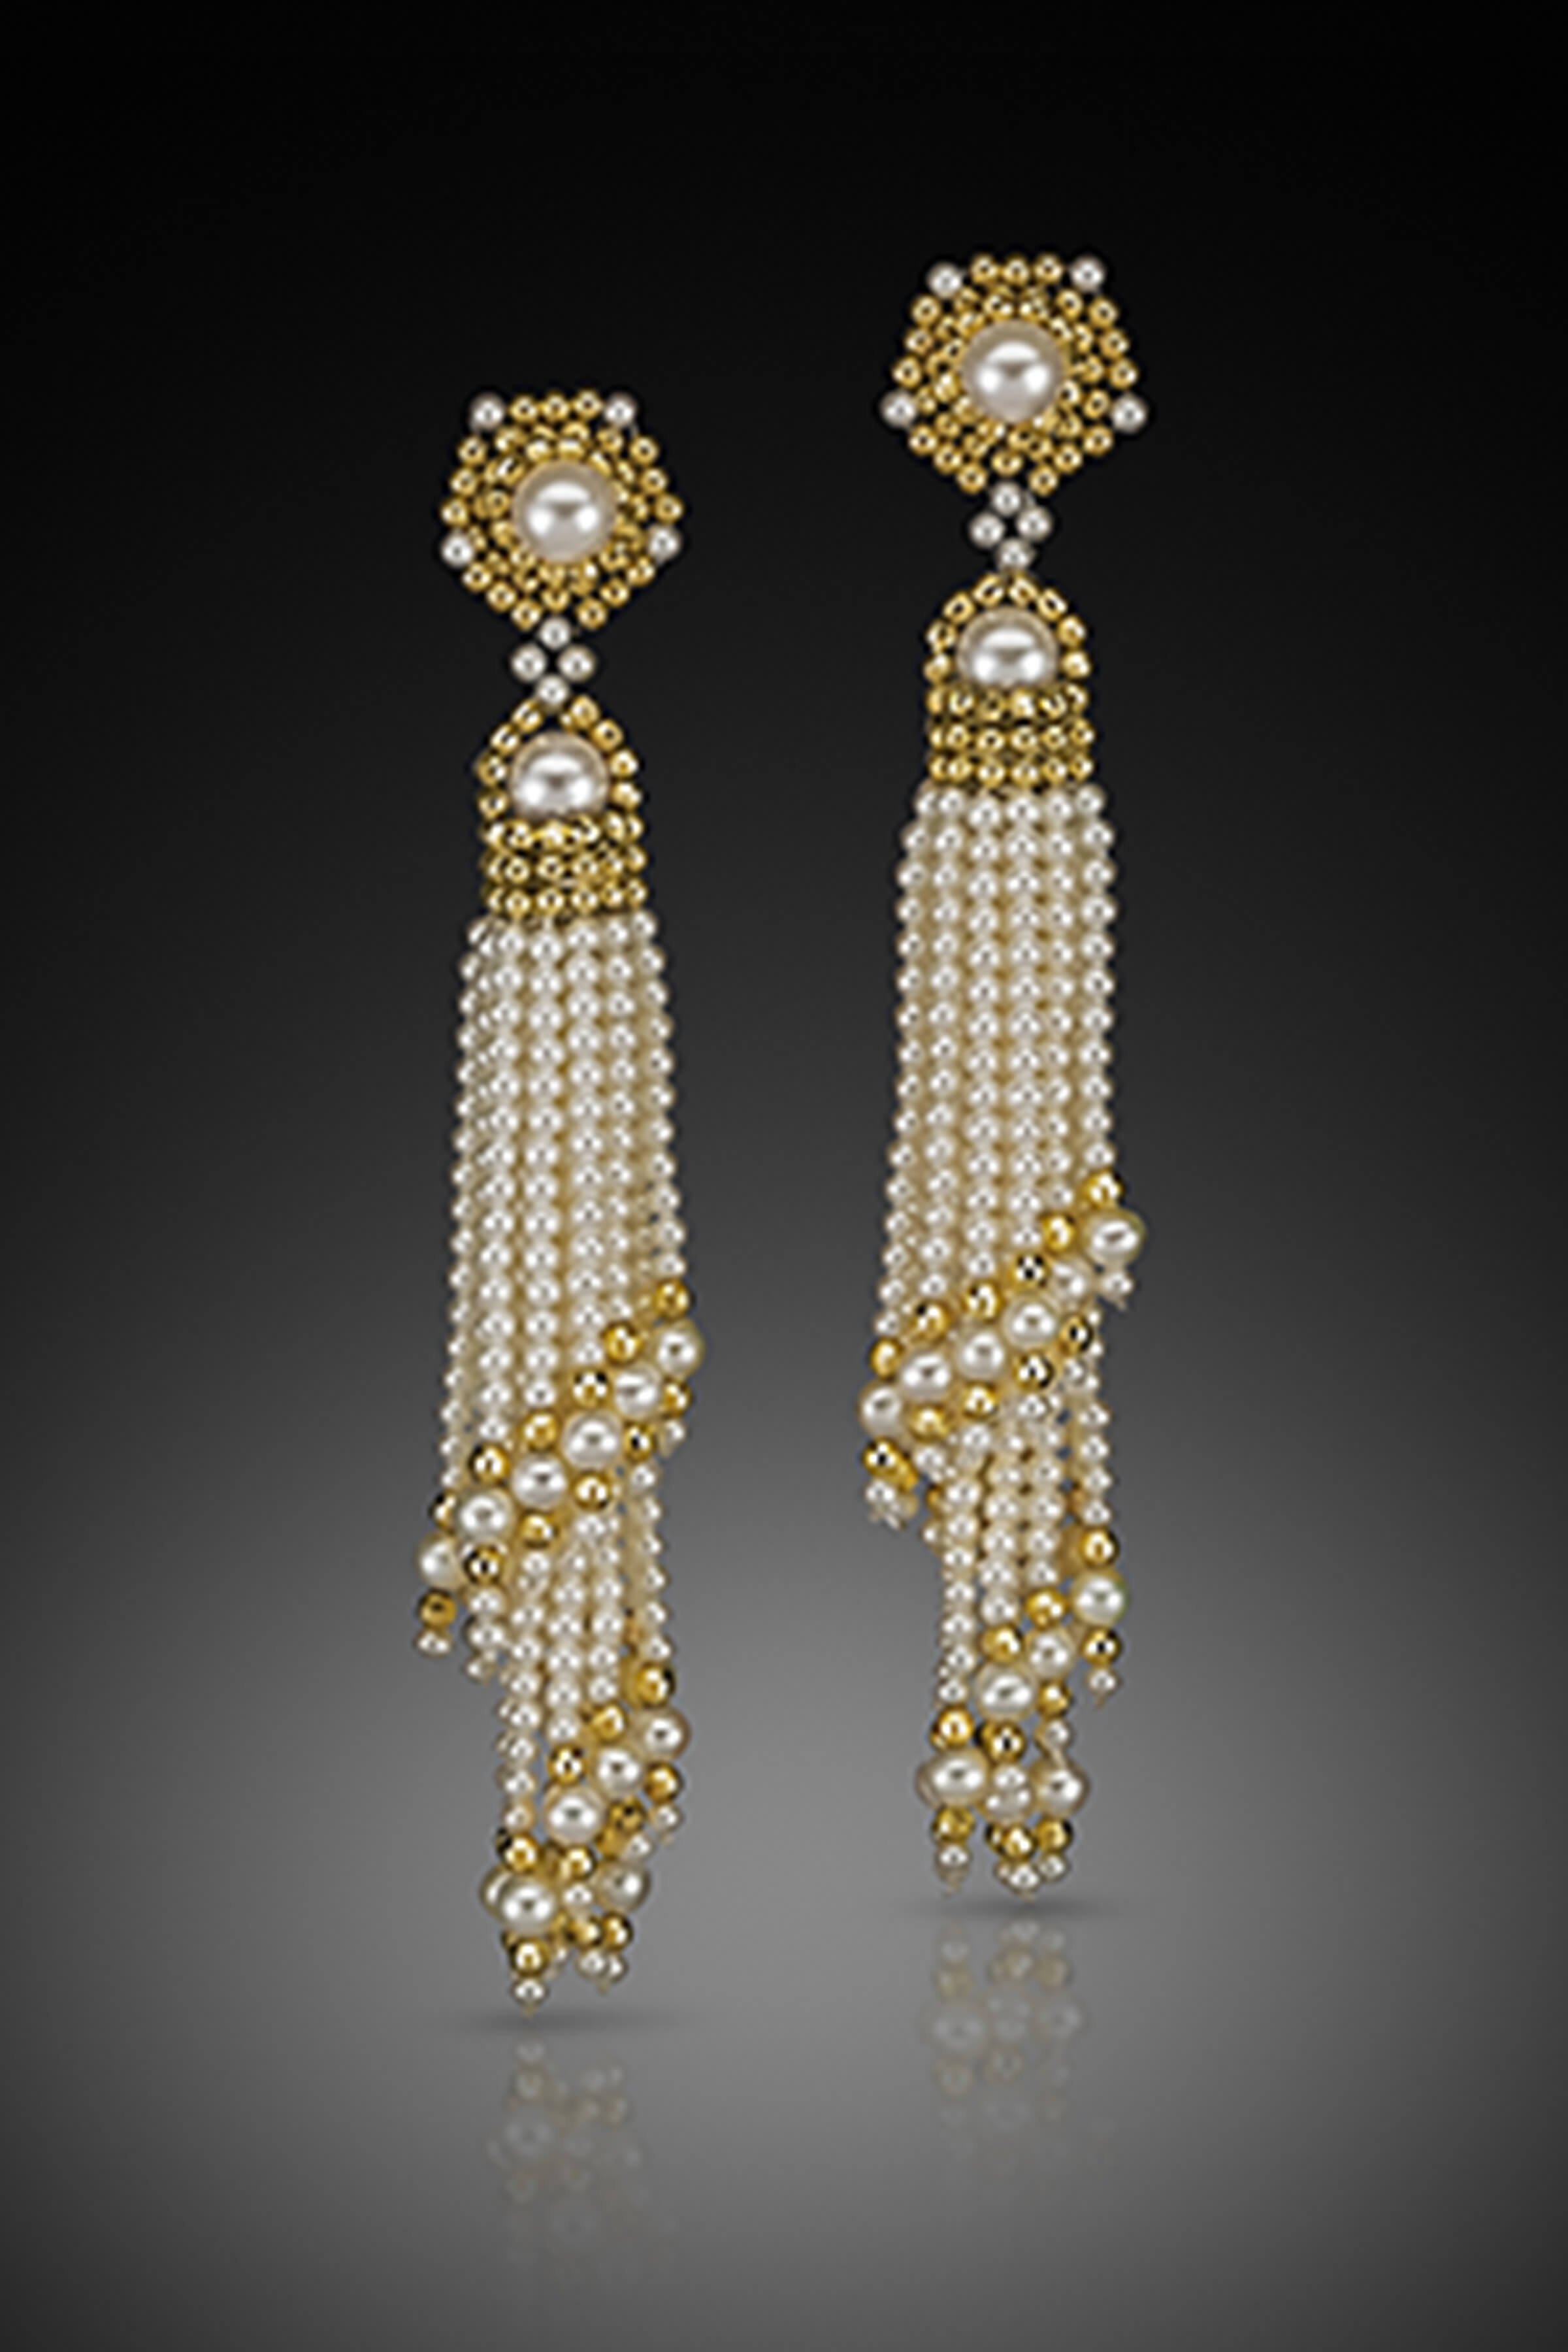 These "swirl" earrings are hand-woven of tiny freshwater pearls, and 14k gold beads.